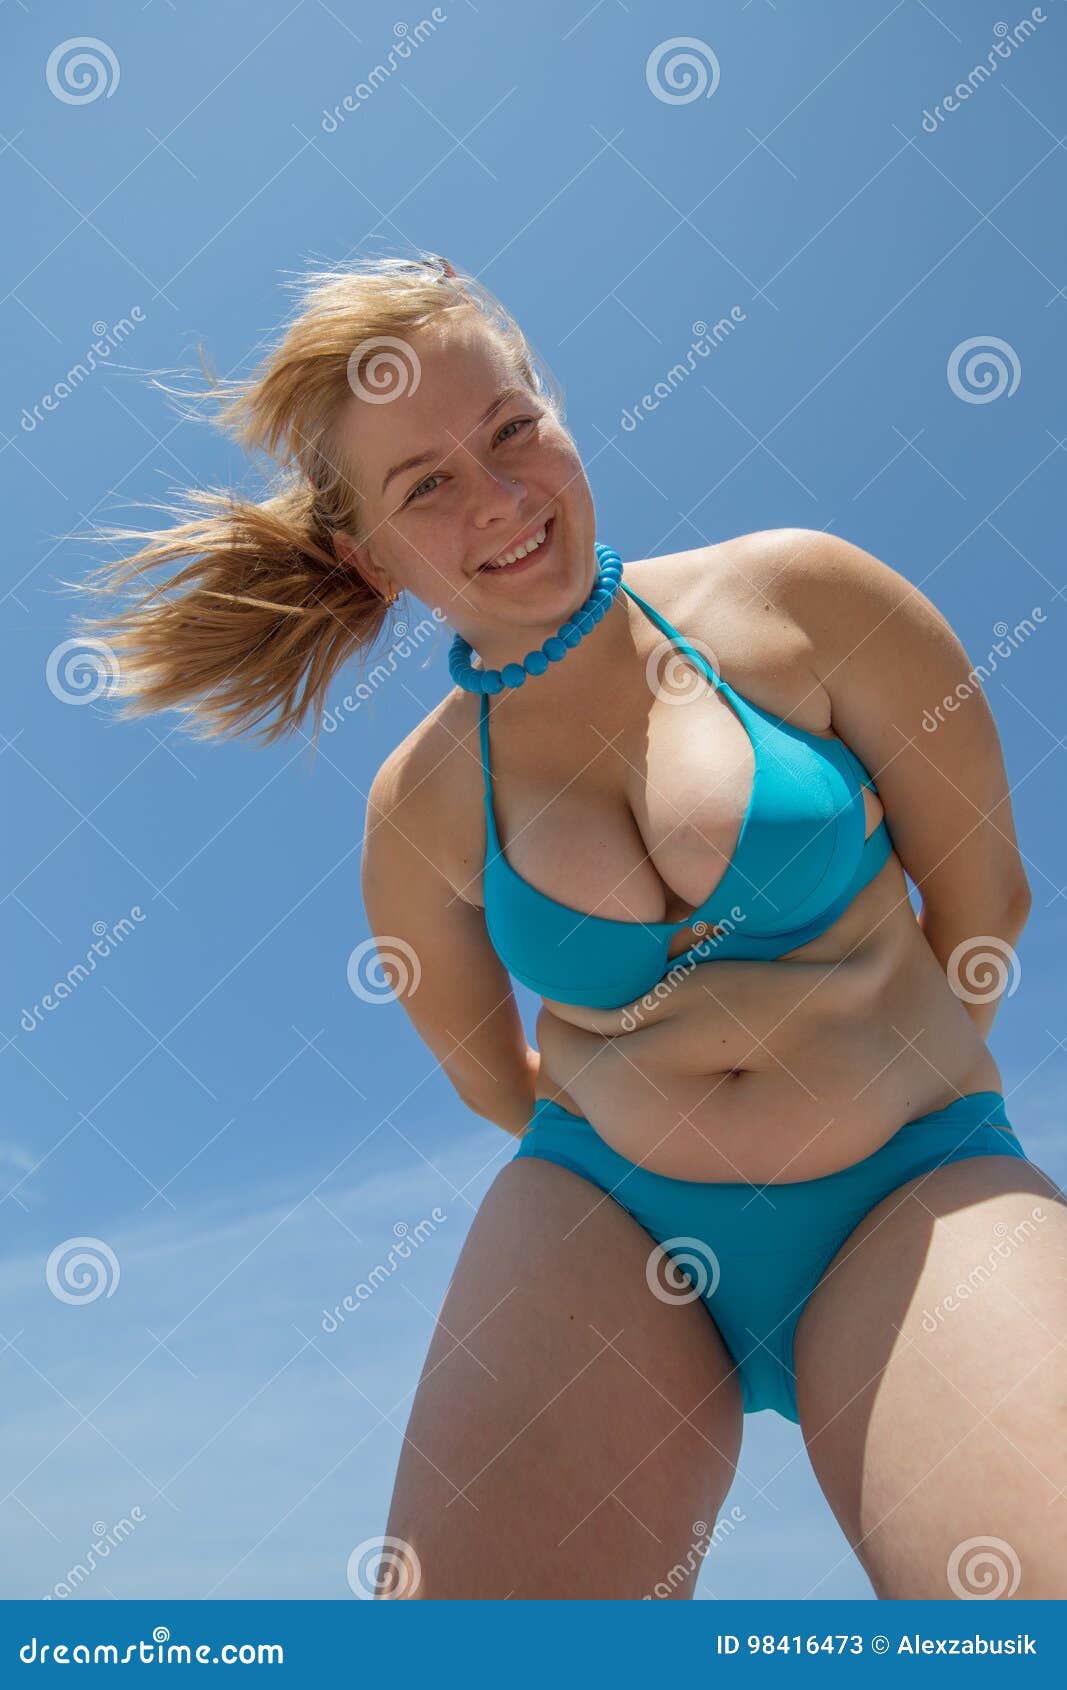 Busty older women Busty Mature Women Photos Free Royalty Free Stock Photos From Dreamstime